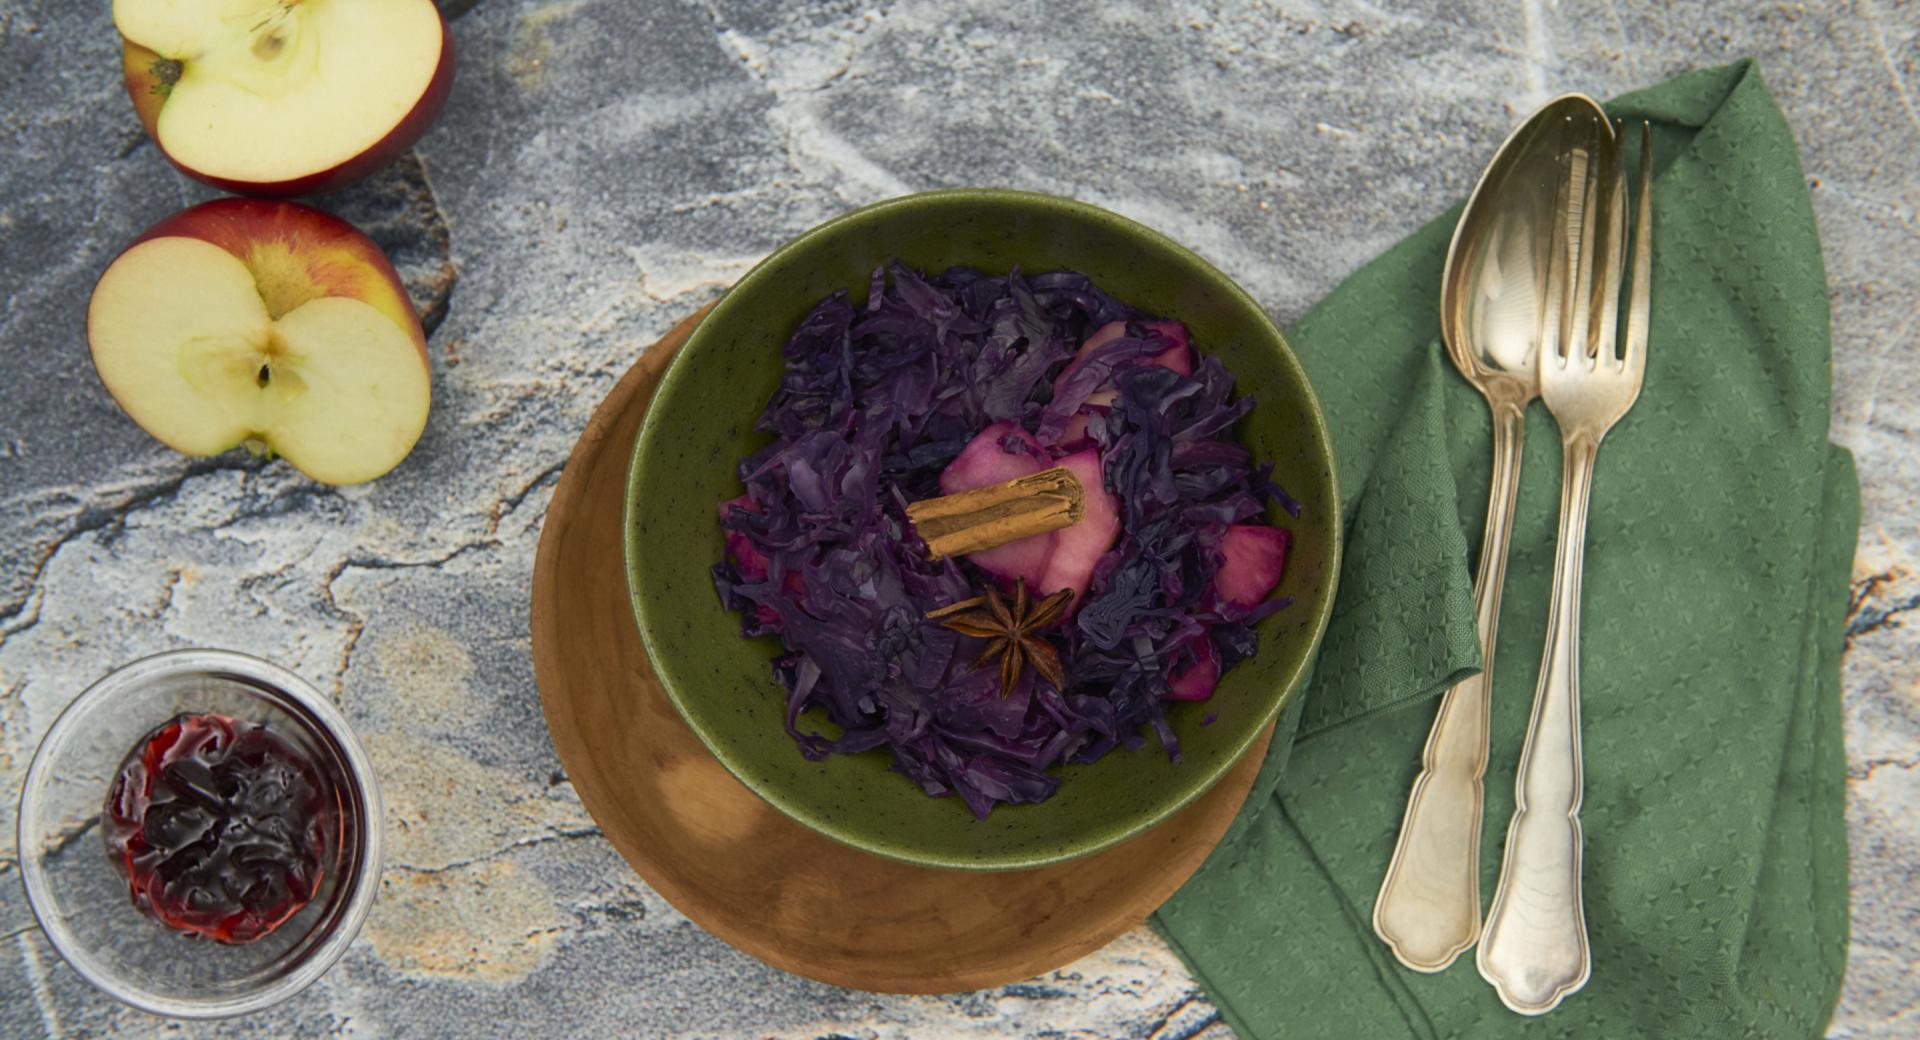 Spiced red cabbage